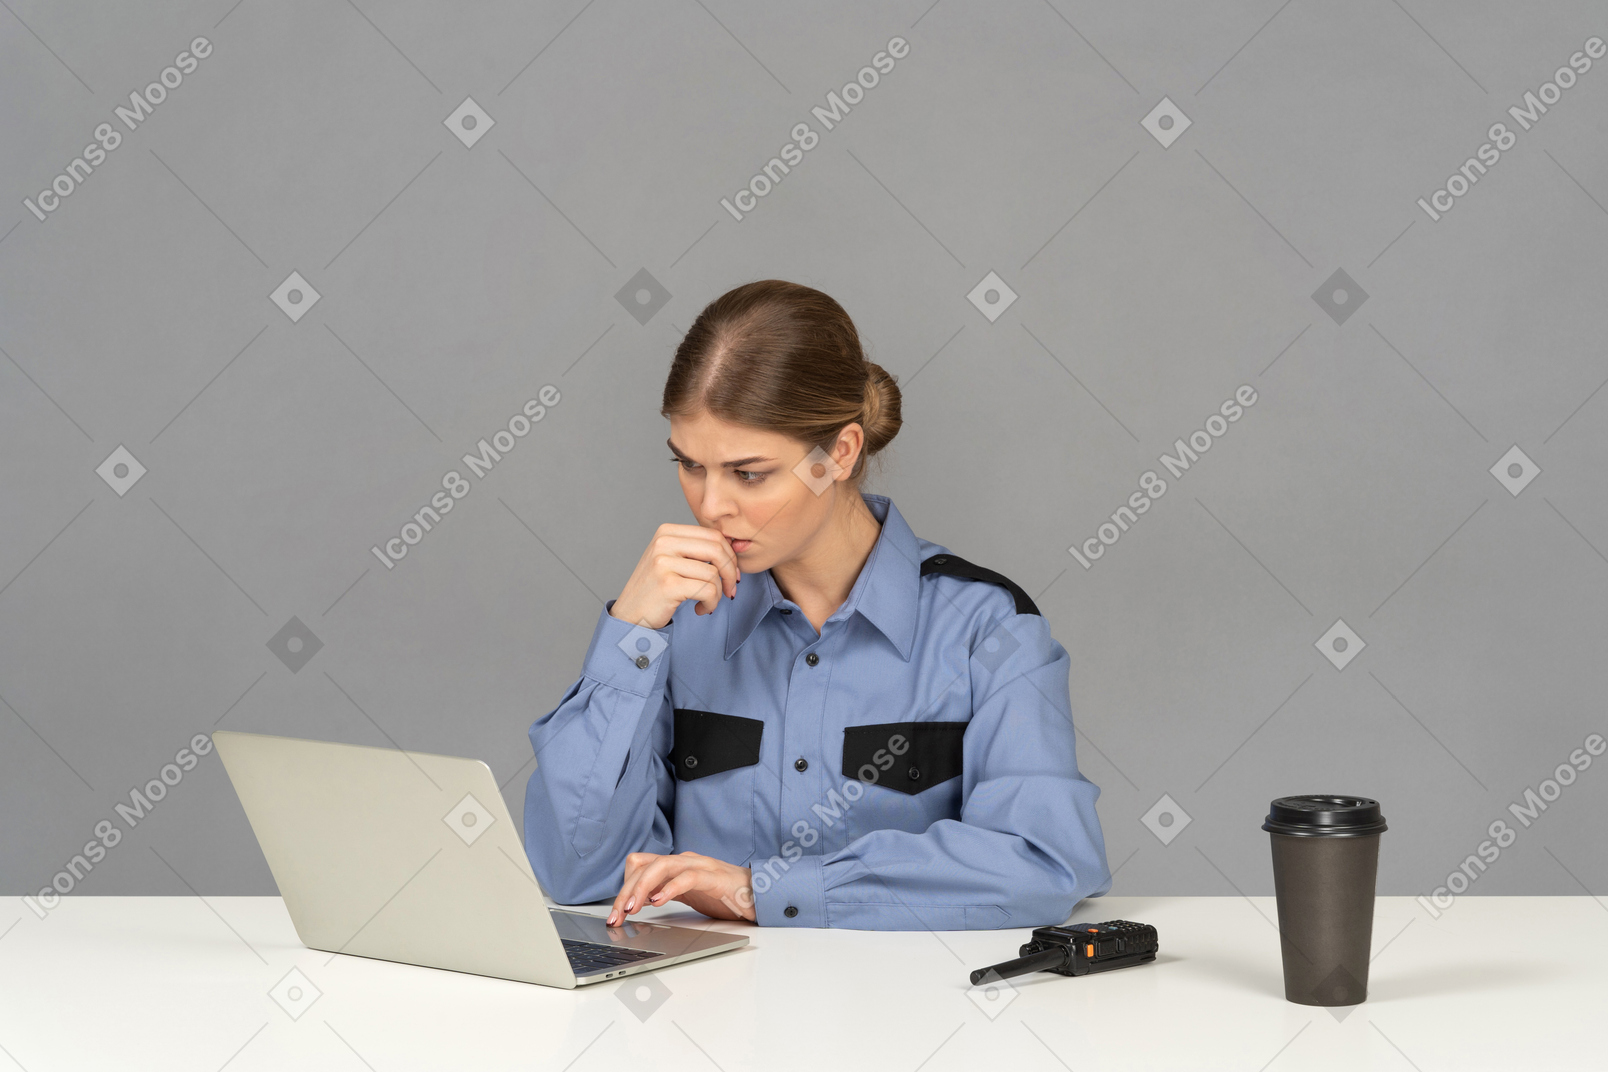 A thoughtful female security guard looking at a laptop